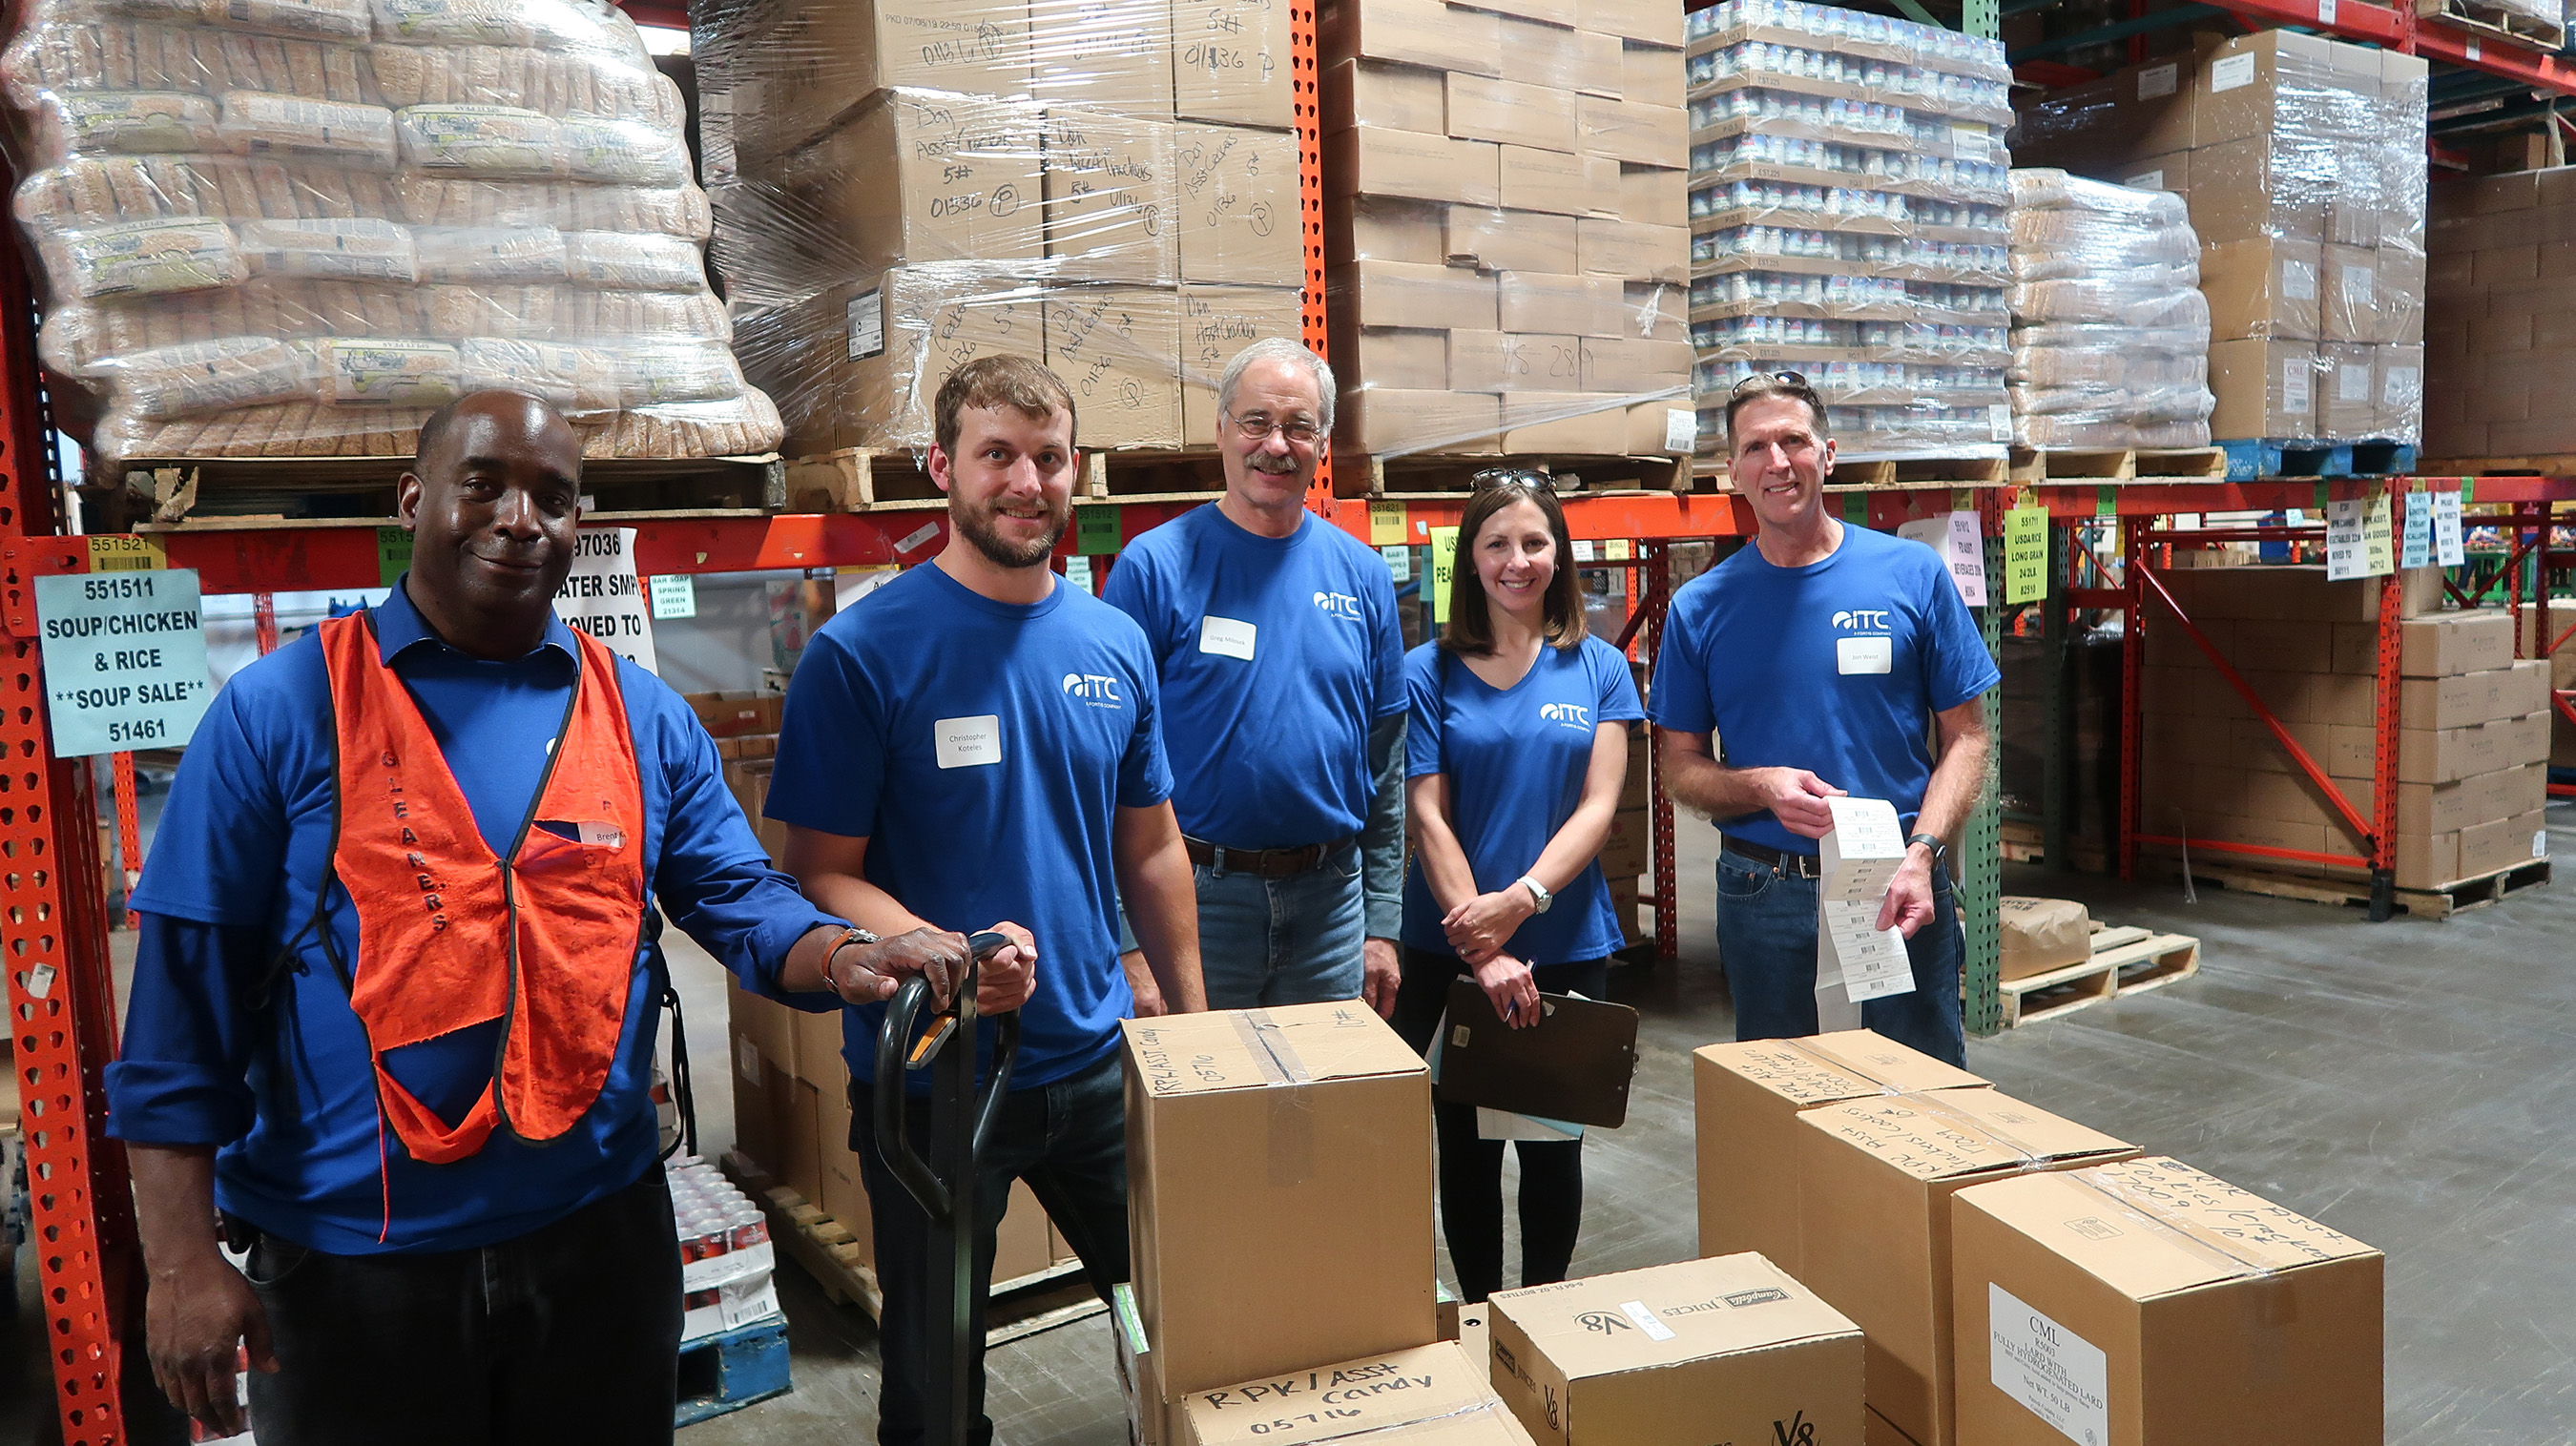 ITC employees shopped the warehouse of Gleaners Community Food Bank in Detroit to fill orders for local agencies and the households they serve. This load contributed to serving about 85,300 meals.